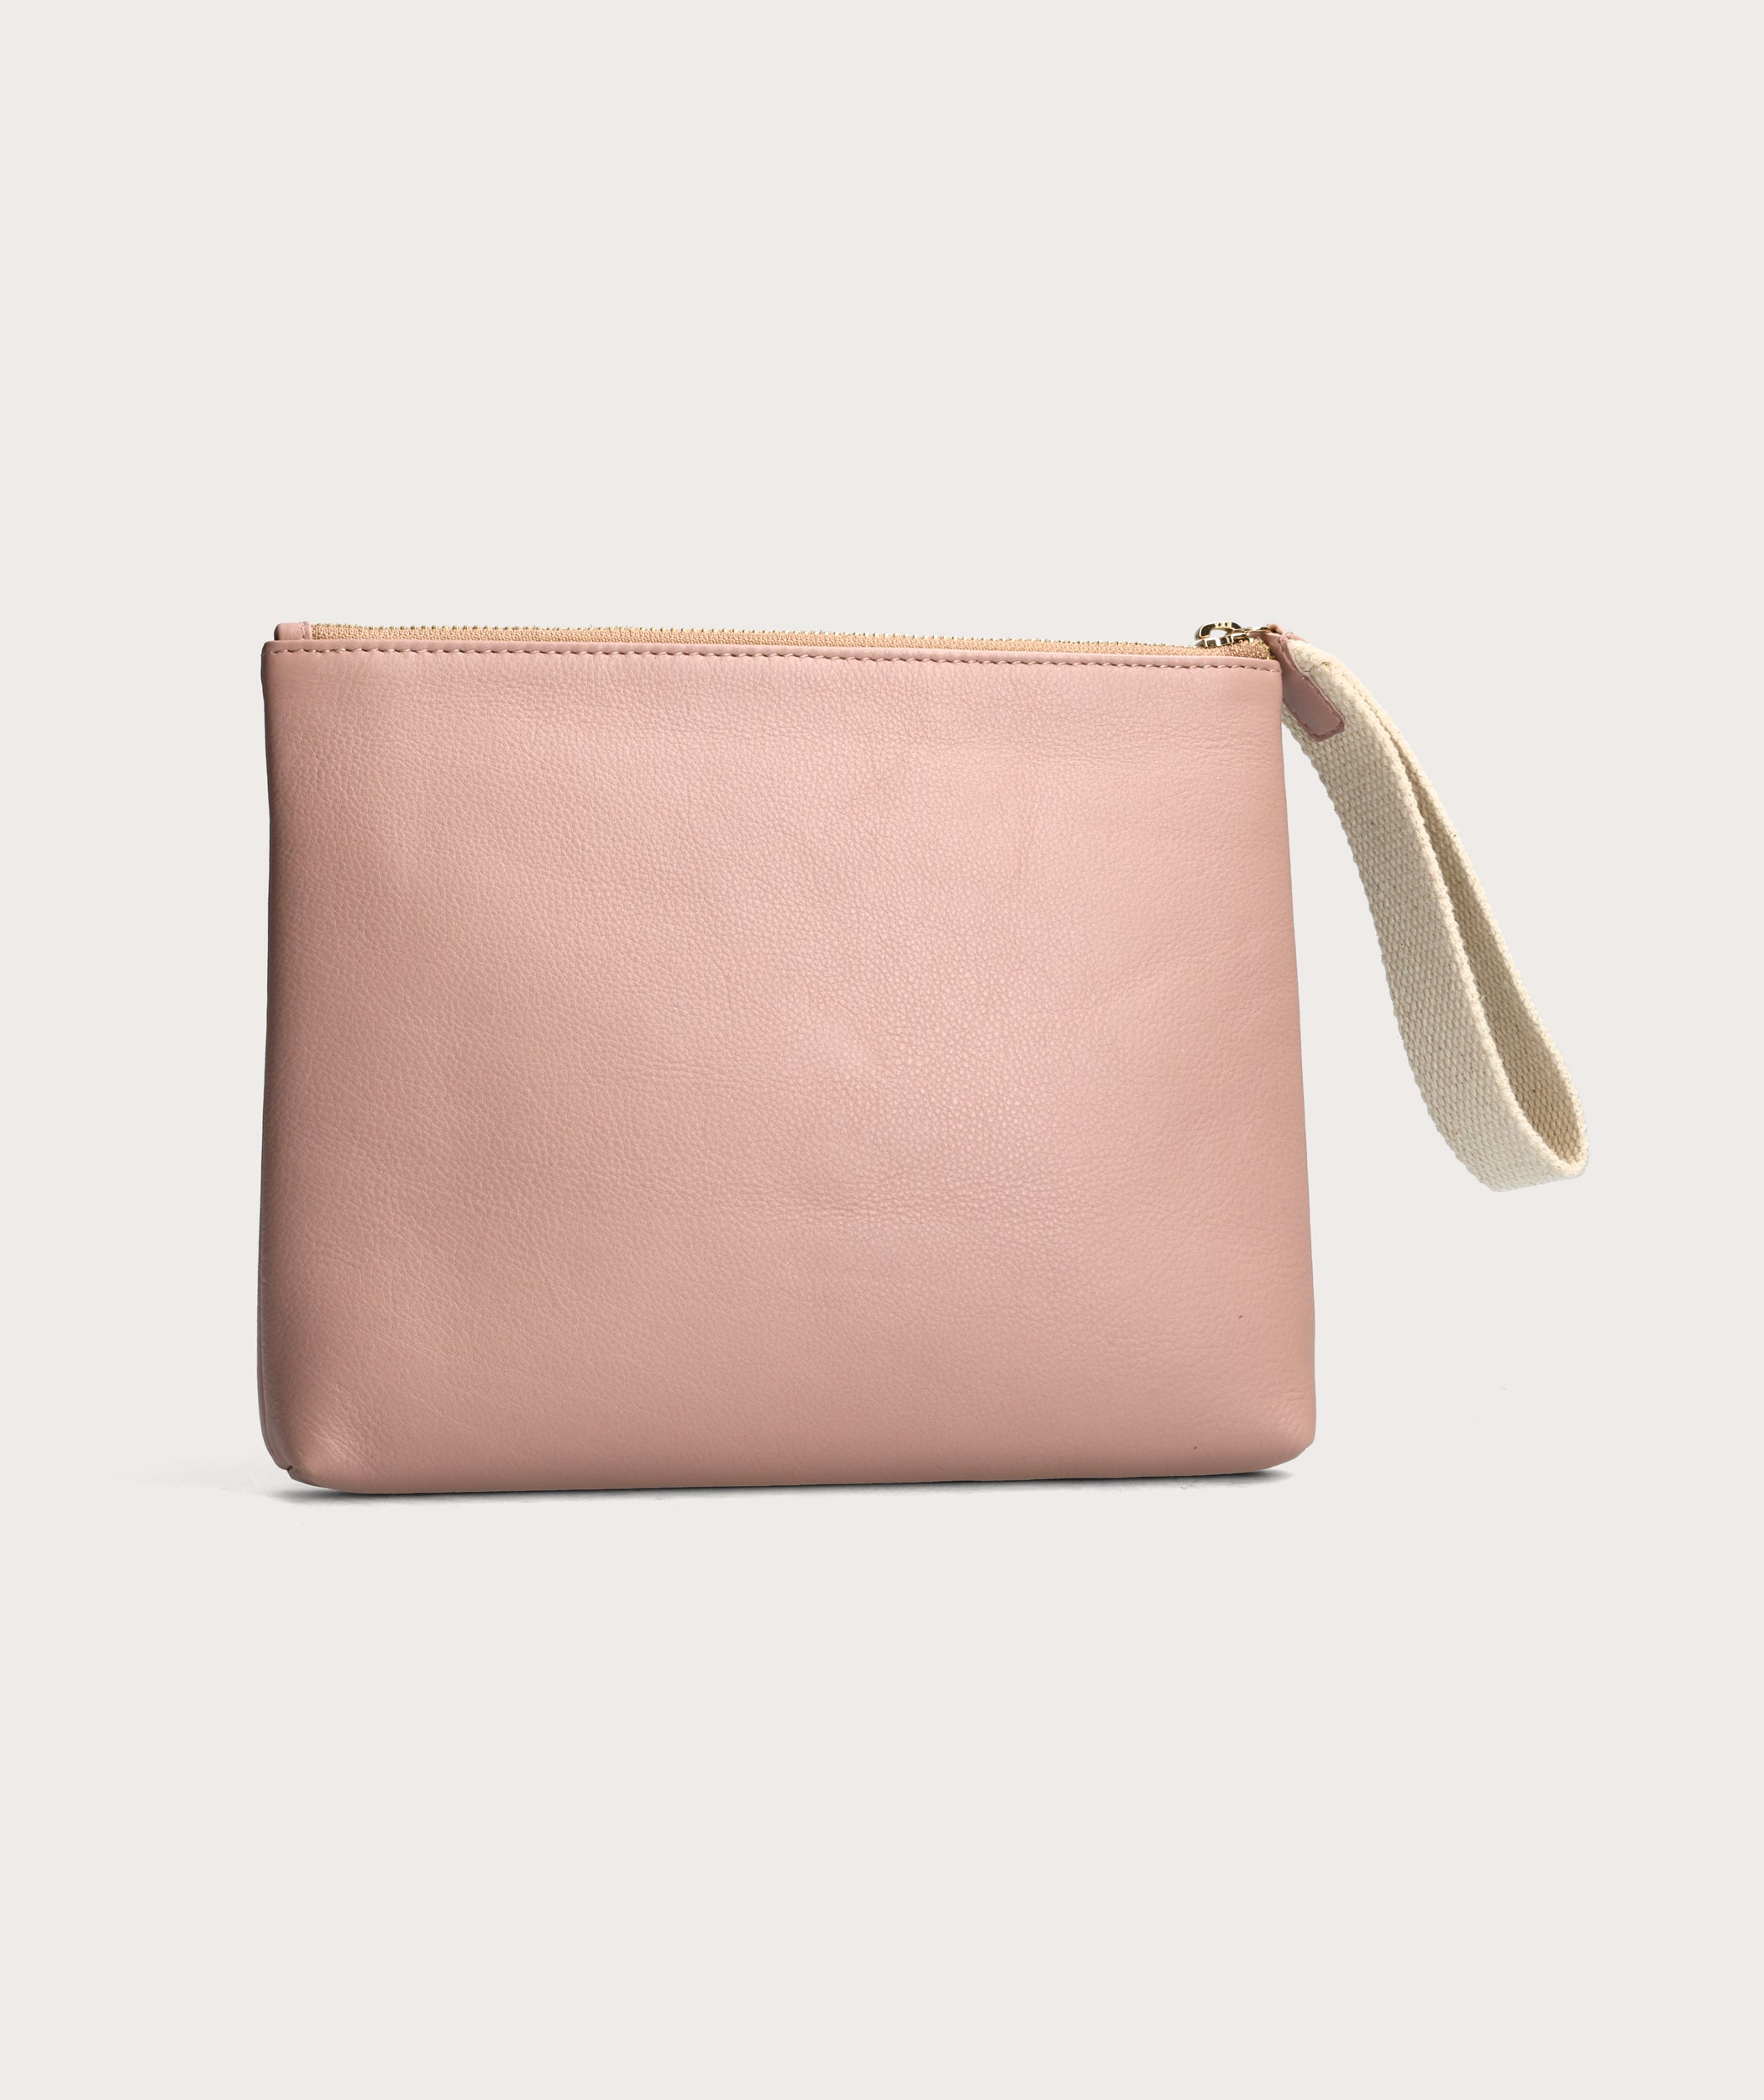 Womens Strathberry pink Leather Nano Tote Bag | Harrods UK